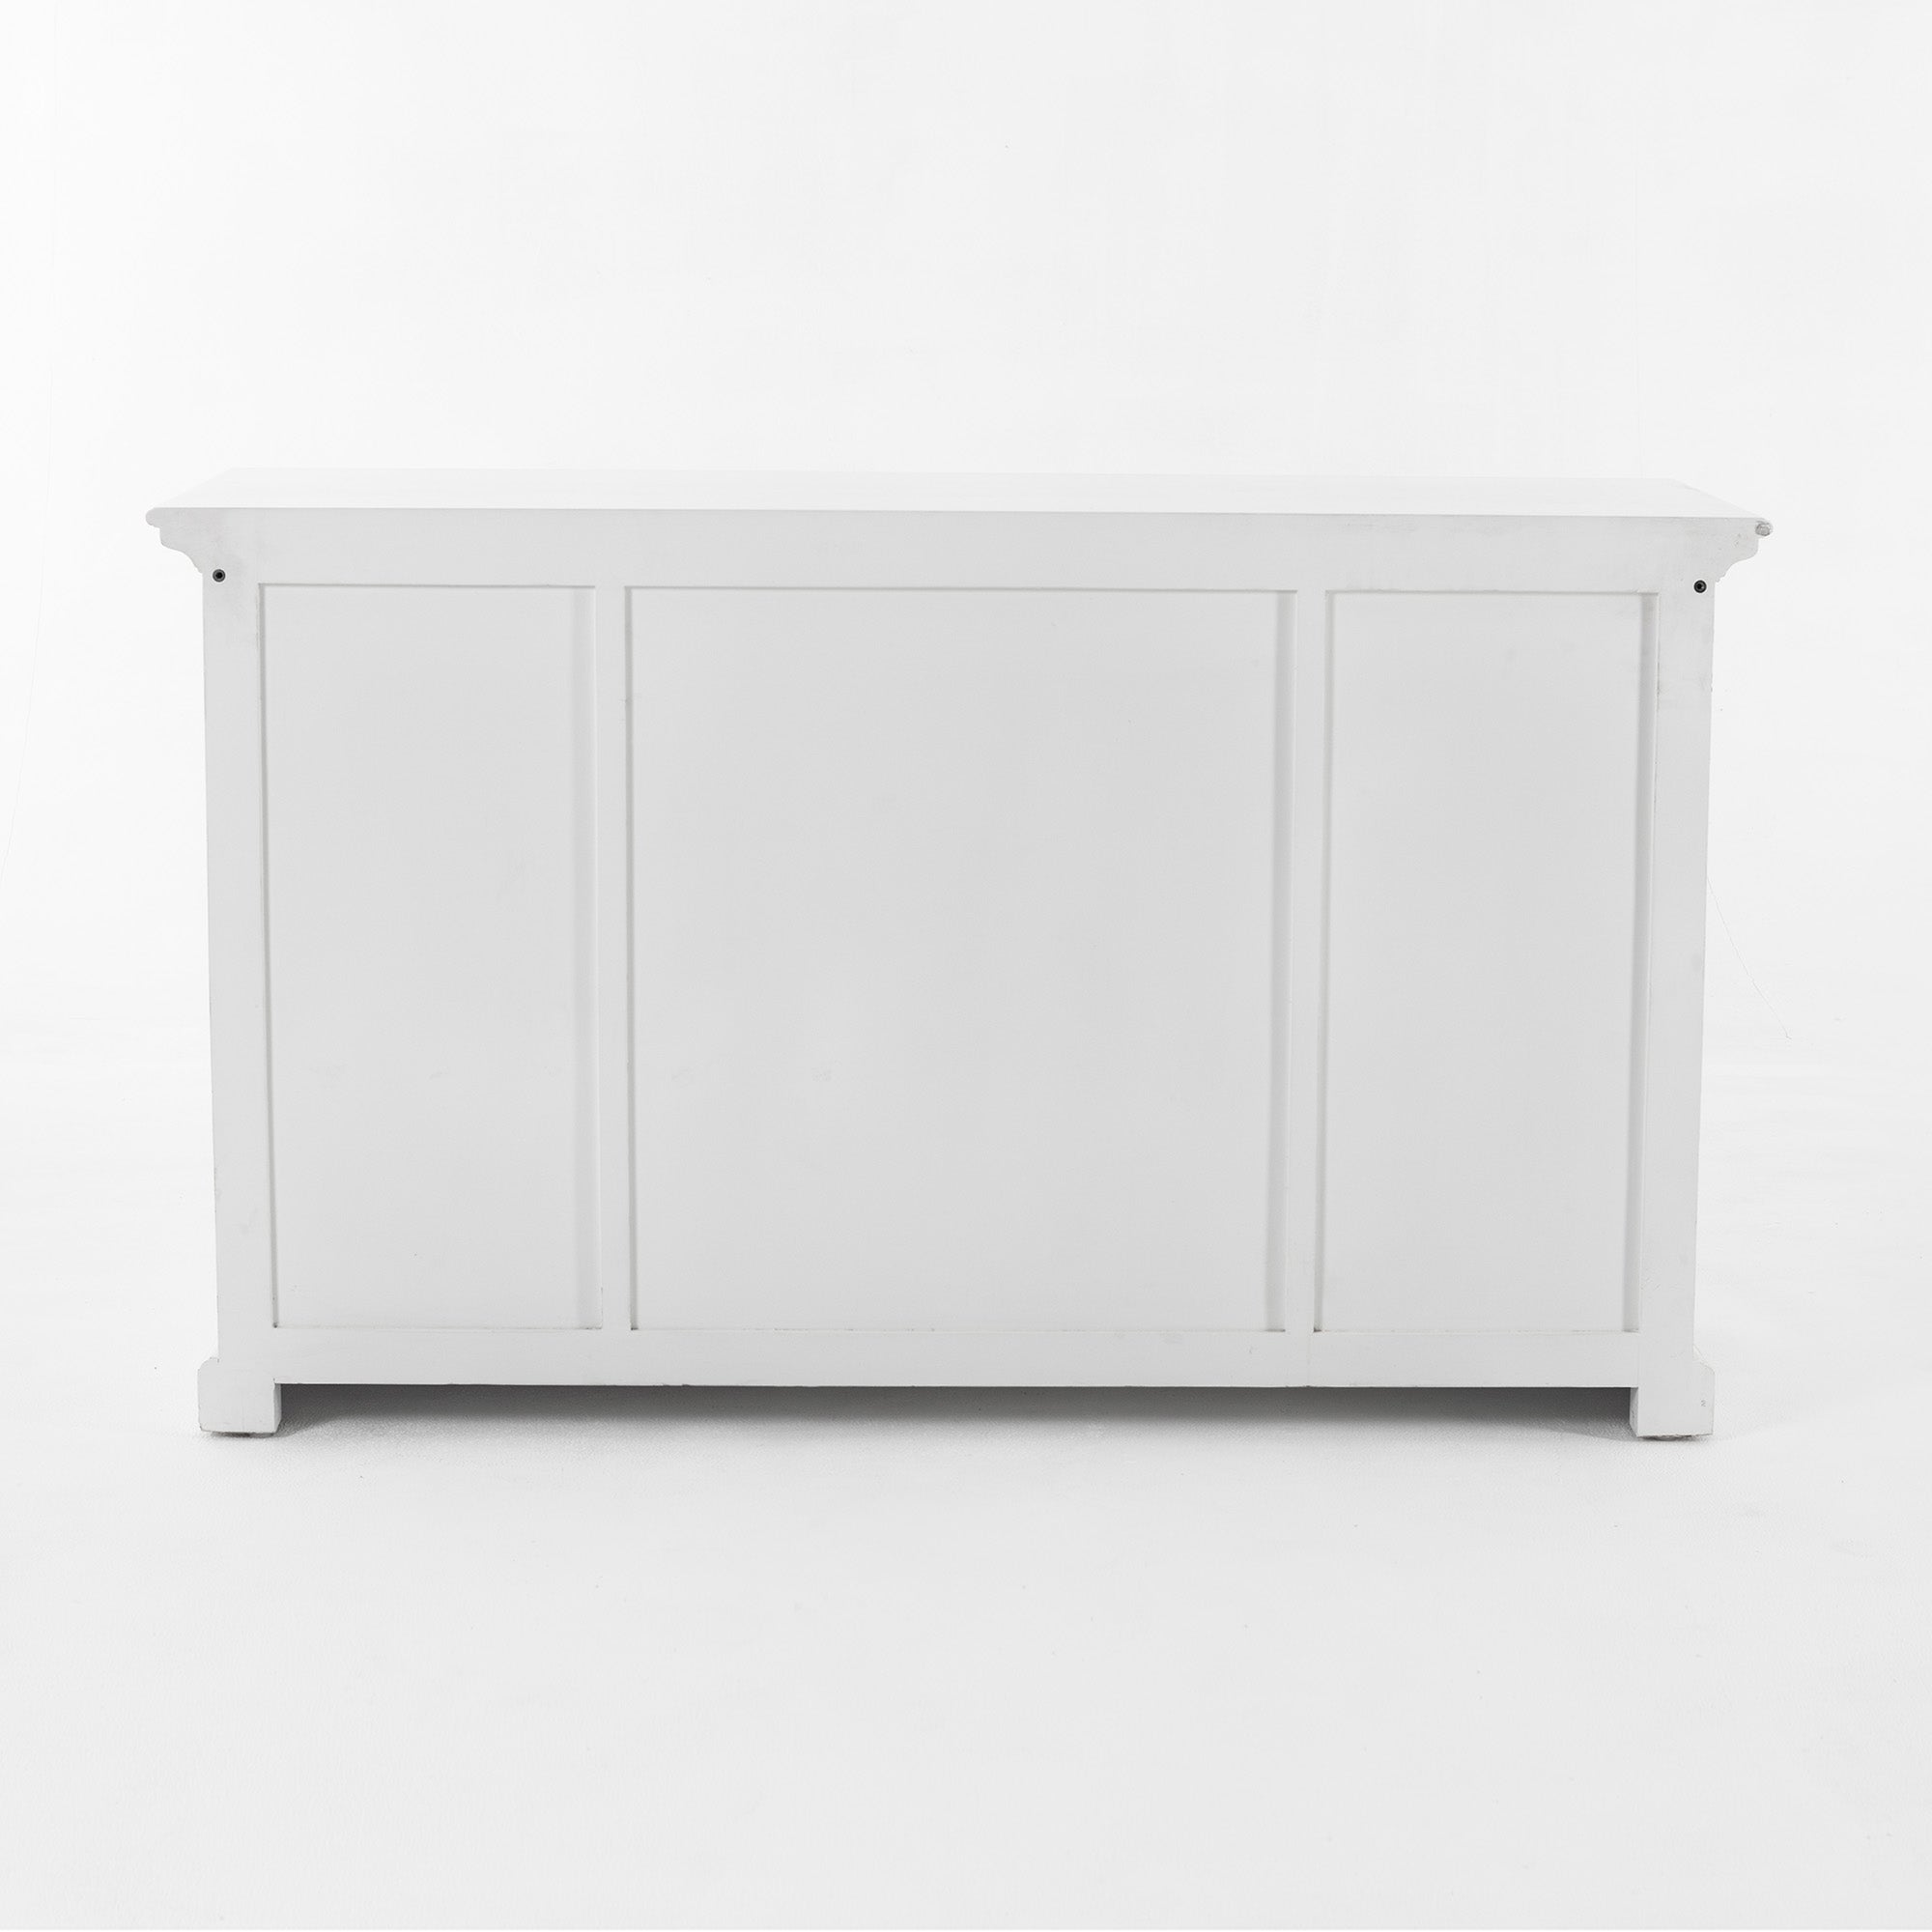 Halifax sideboard with 4 doors and 3 drawers